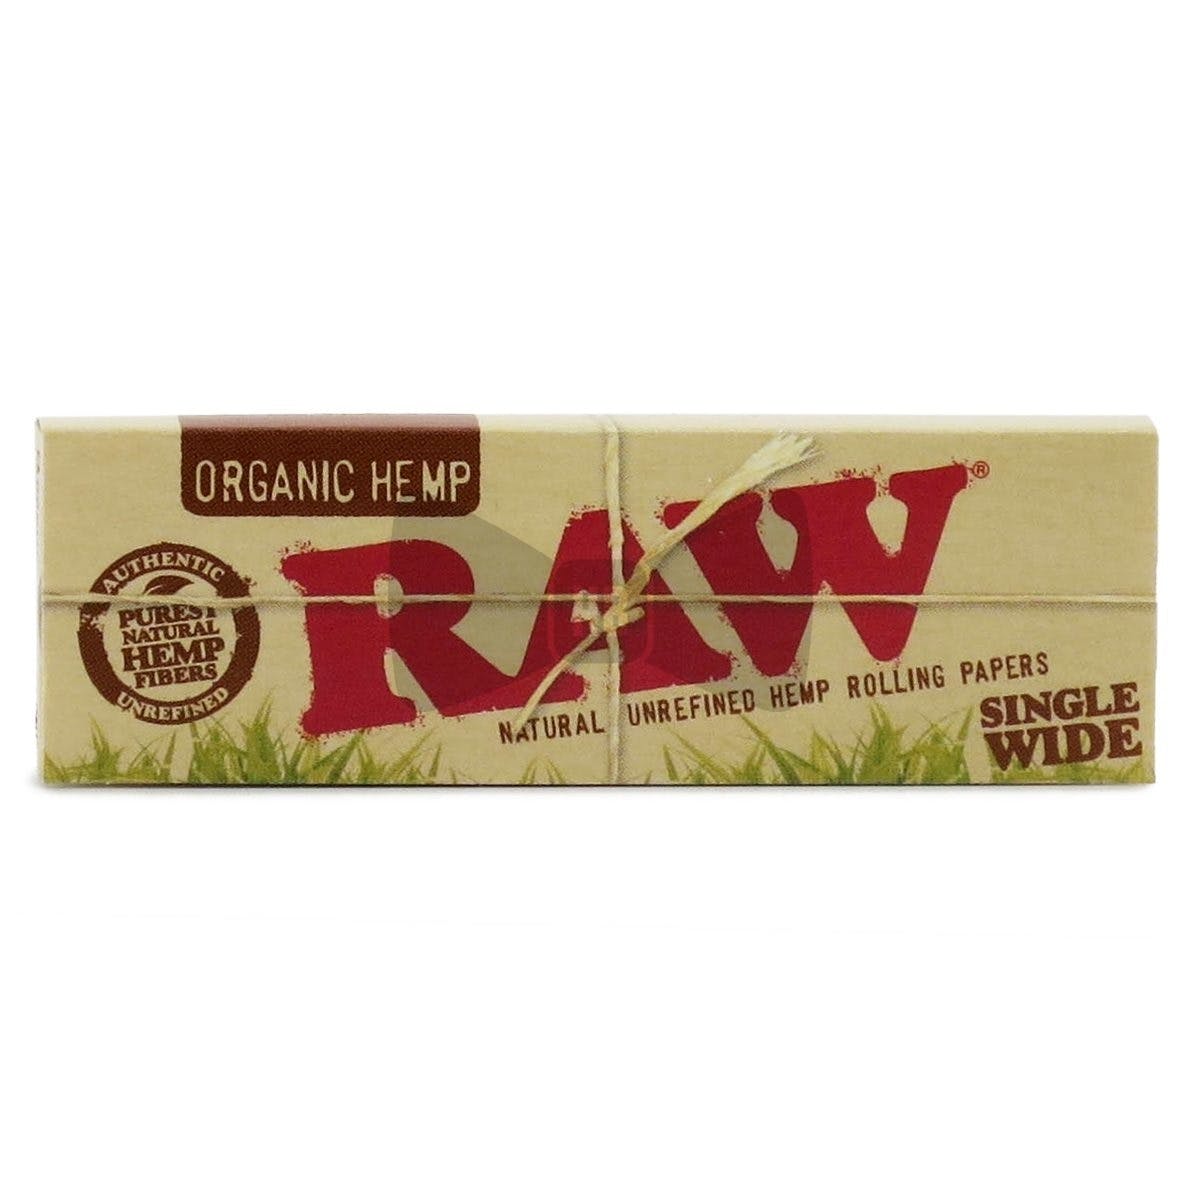 raw 1 1/4 size joint papers